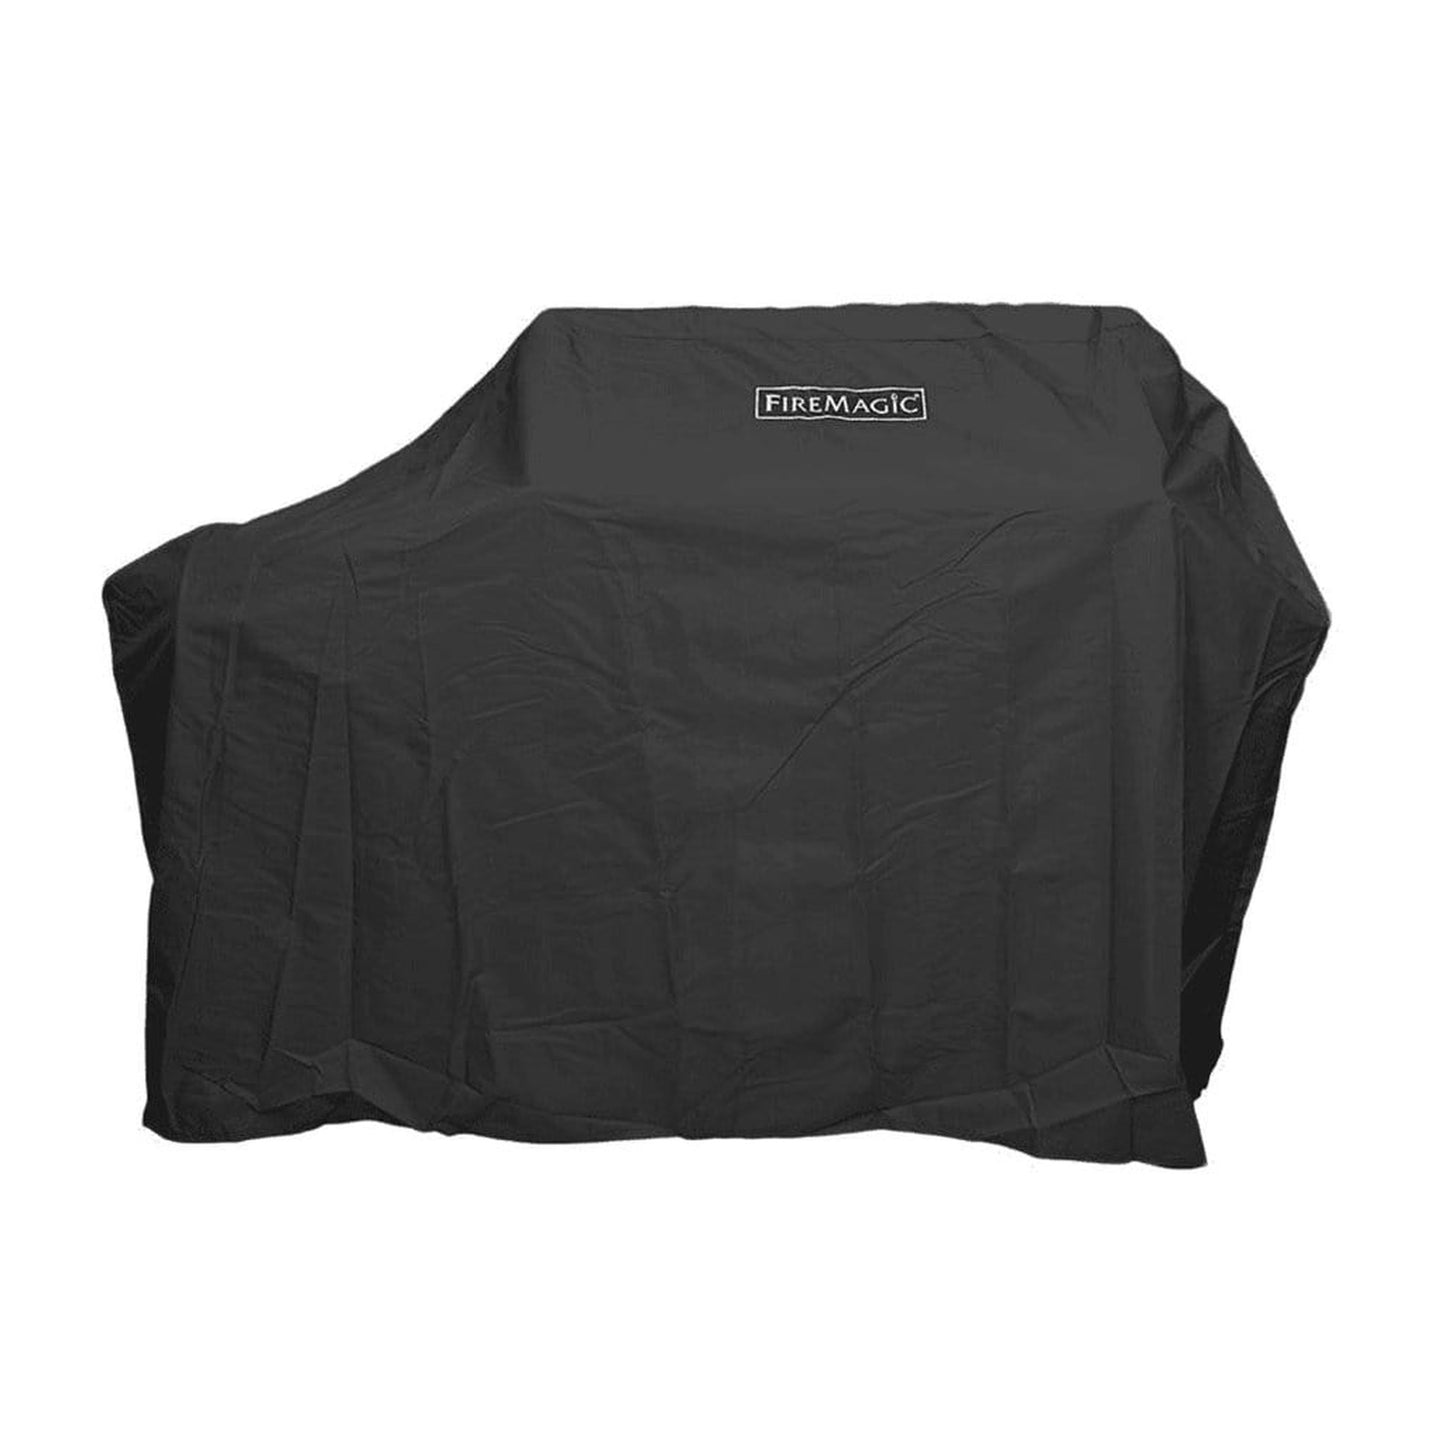 Fire Magic 5160-20F Black Vinyl Cover for Aurora A540s & Choice C540s Gas Grills/ Legacy RCH Charcoal Freestanding Grills